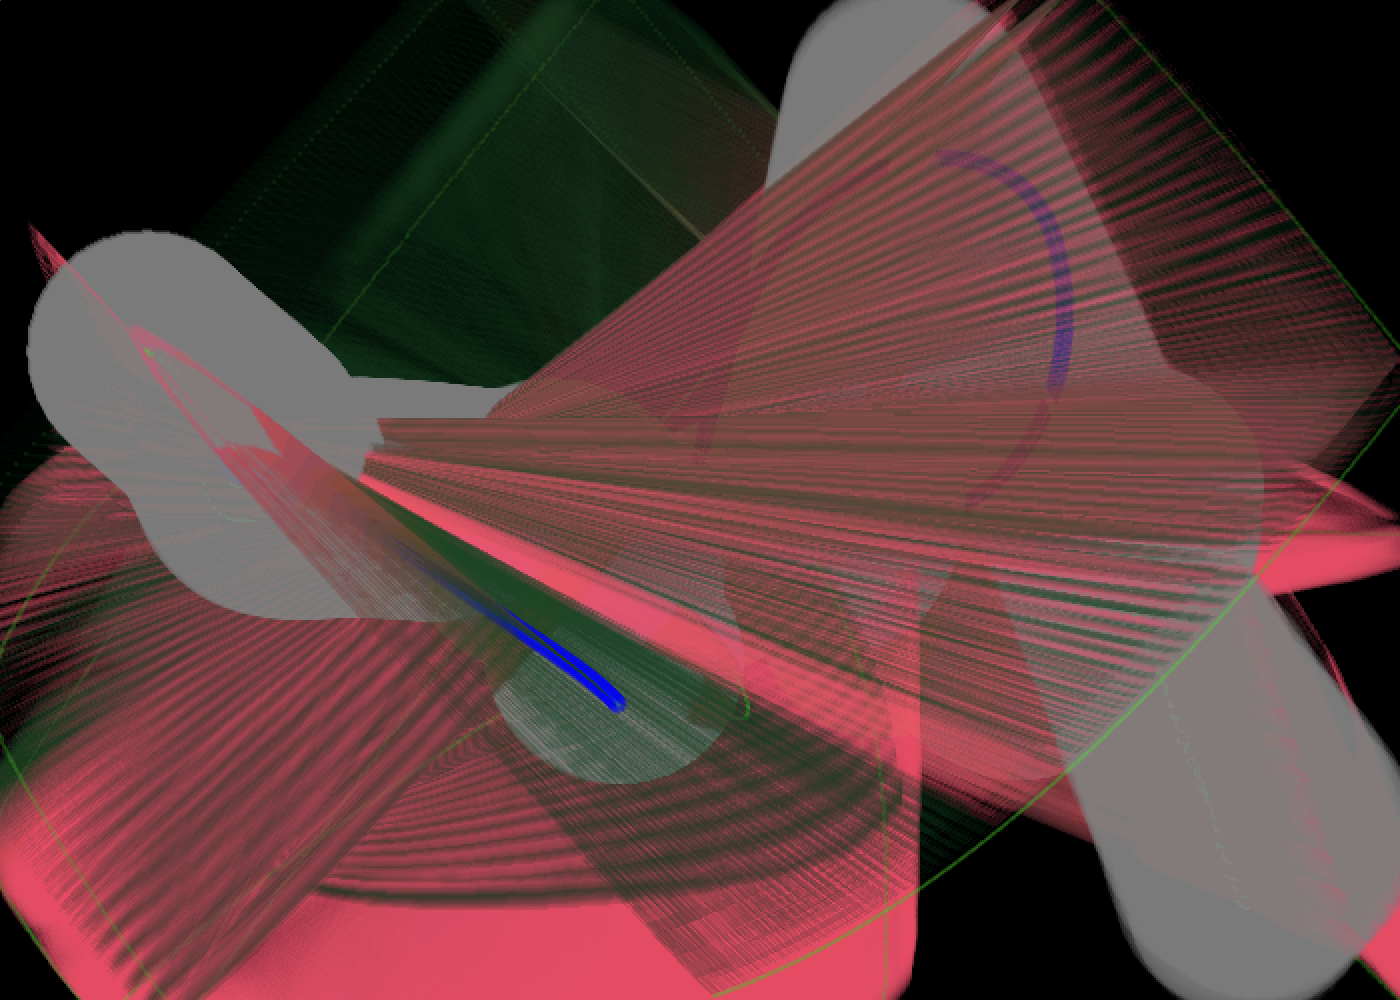 Screenshot of animating geometric shapes. Red lines fan out over the top of moving gray circles, over darker green swirls on a background of black.